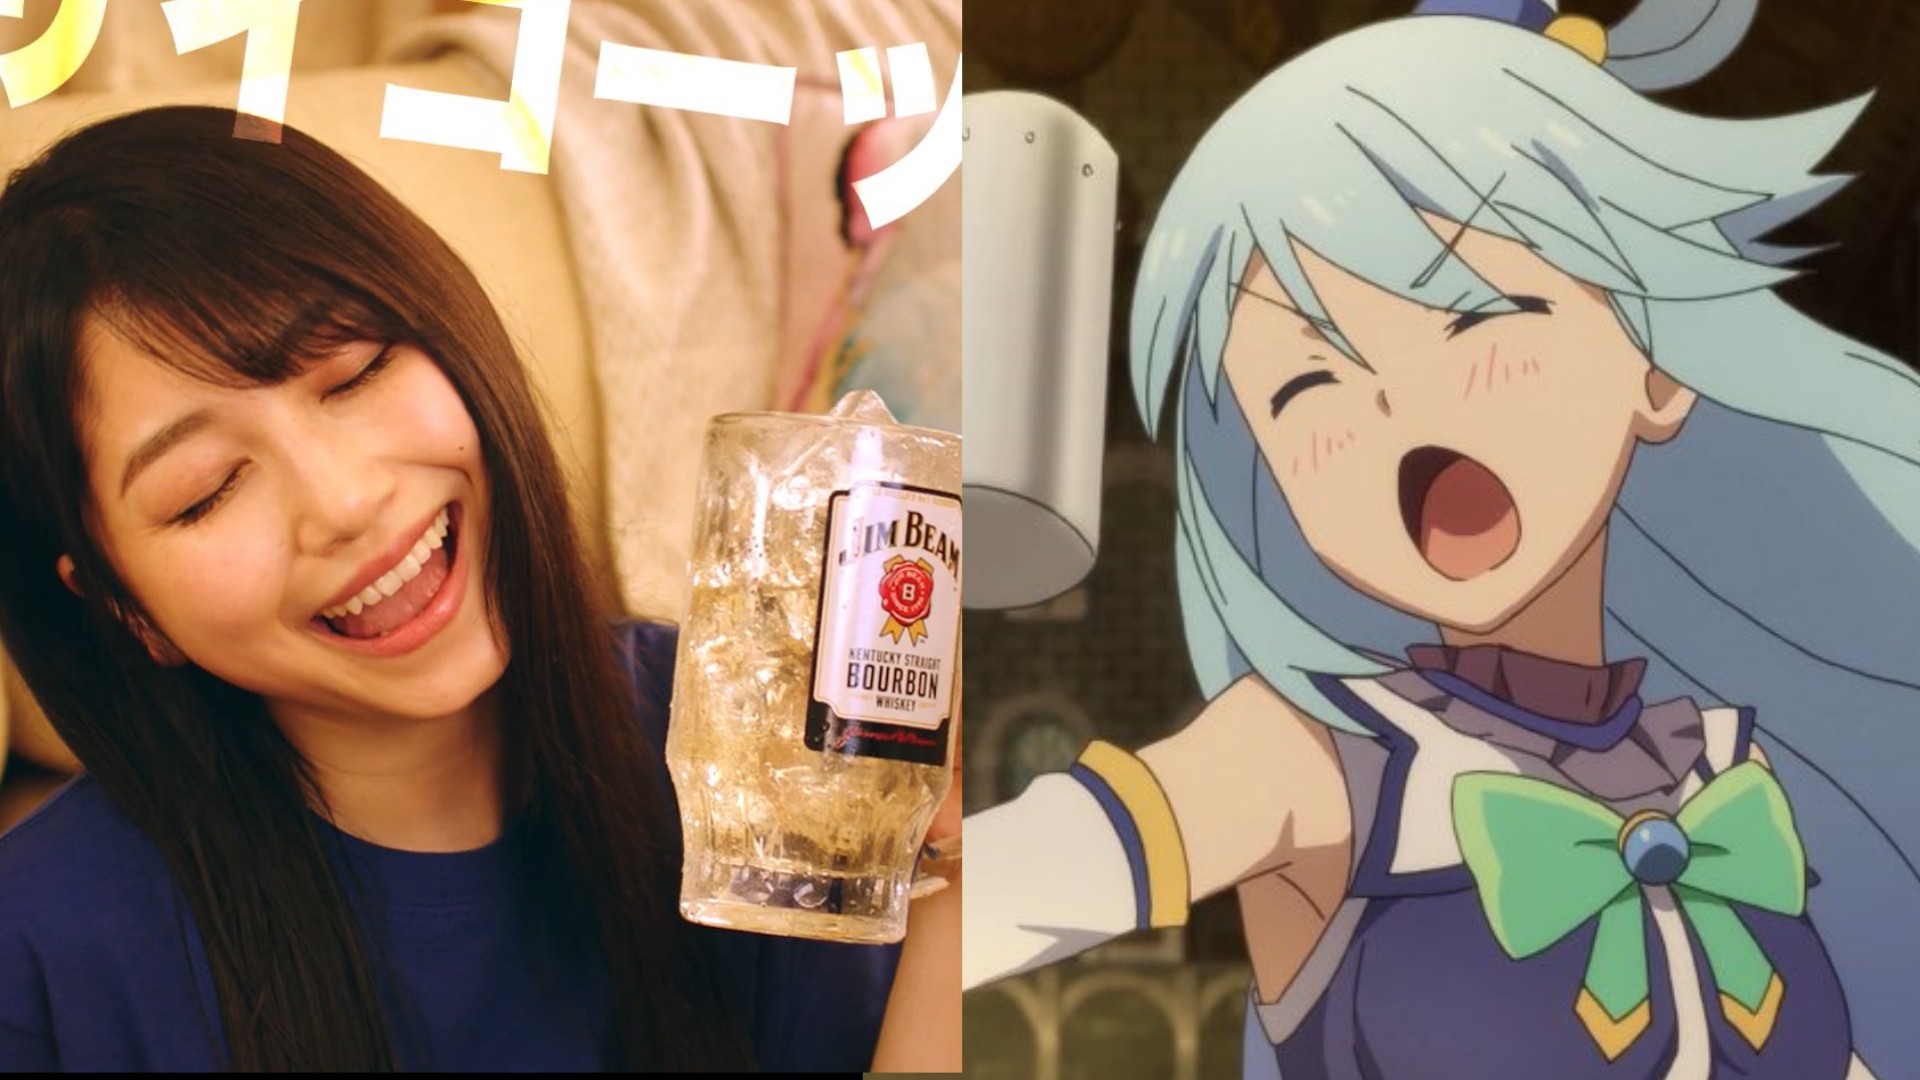 Voice Actress Sora Amamiya Enjoys Suntory’s Drink in a New Commercial